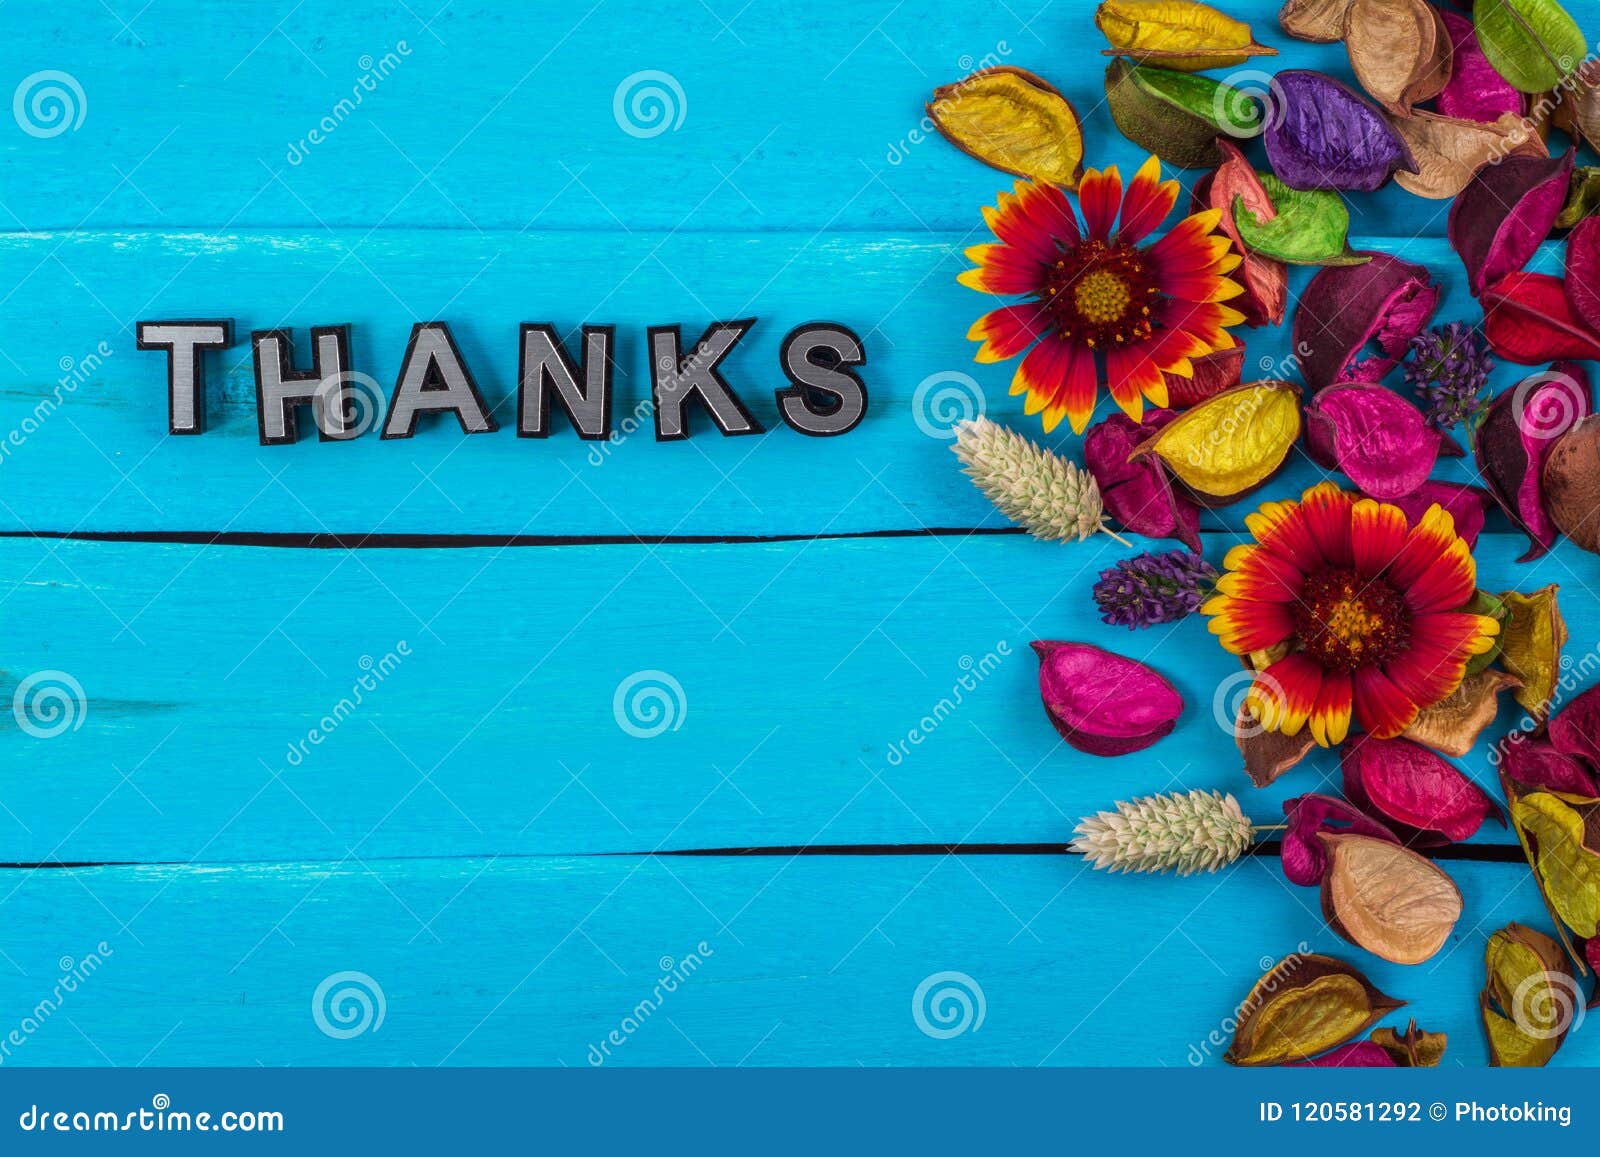 thanks word on blue wood with flower